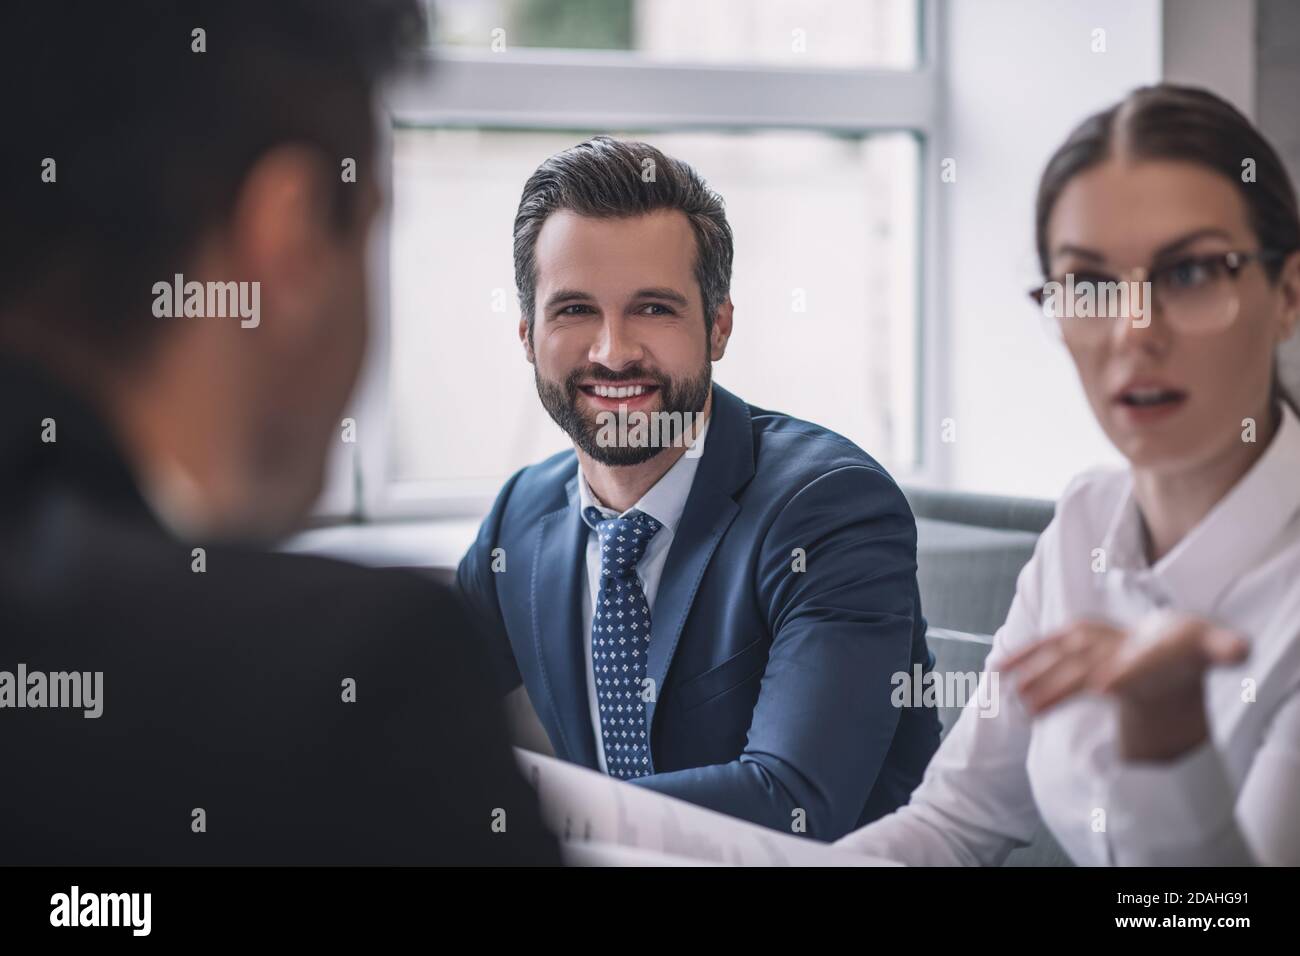 Gesturing serious woman, smiling man and colleague back Stock Photo